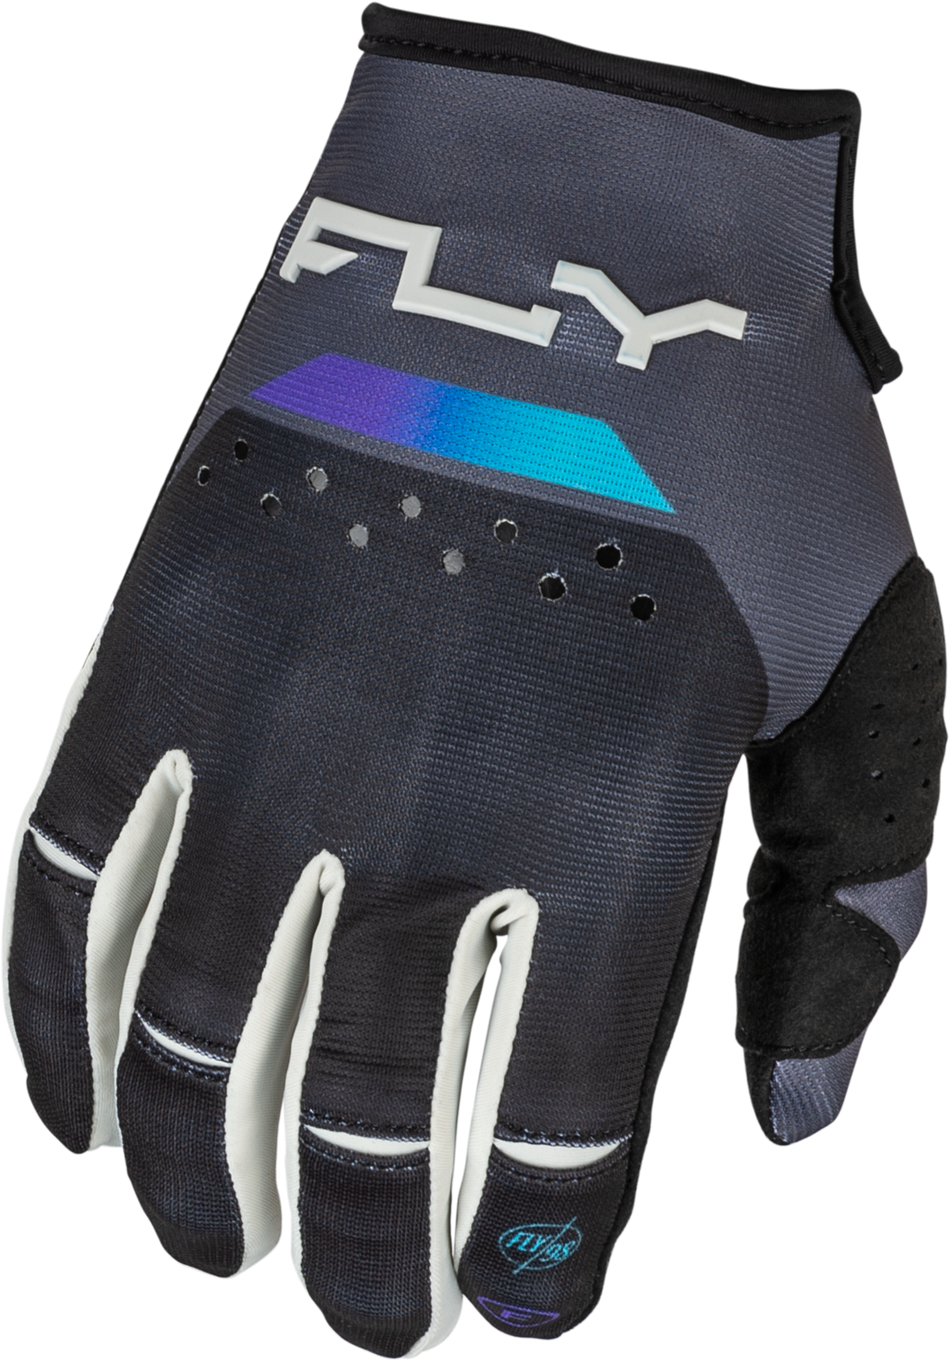 FLY RACING Youth Kinetic Reload Gloves Charcoal/Black/Blue Iridium Ym 377-510YM